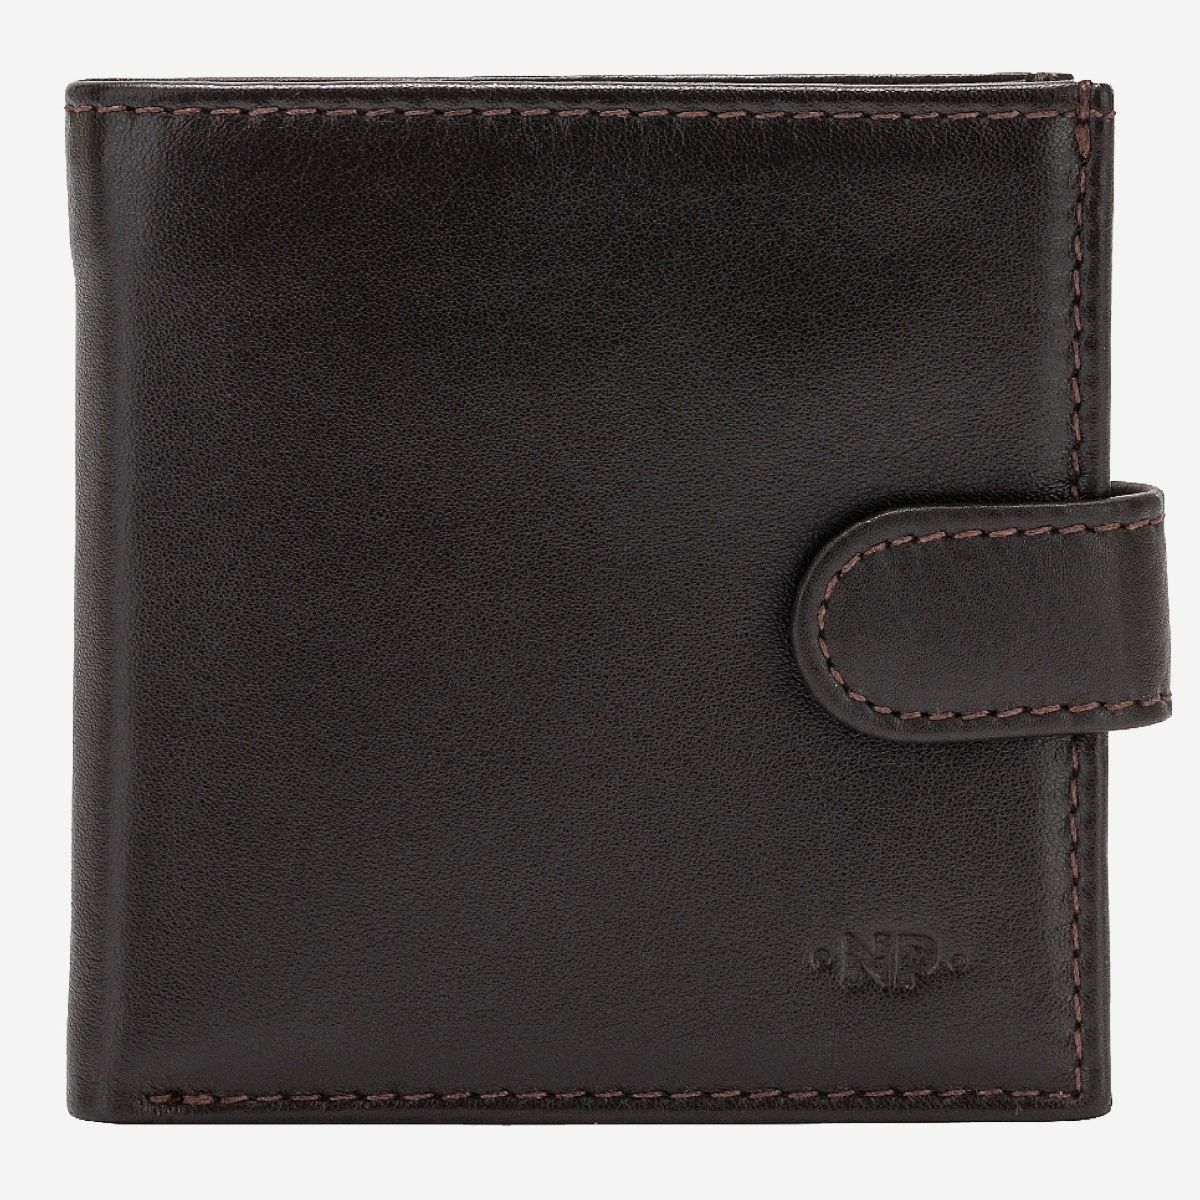 NUVOLA PELLE Mens Leather Wallet With Snap Closure Nappa - Dark Brown ...